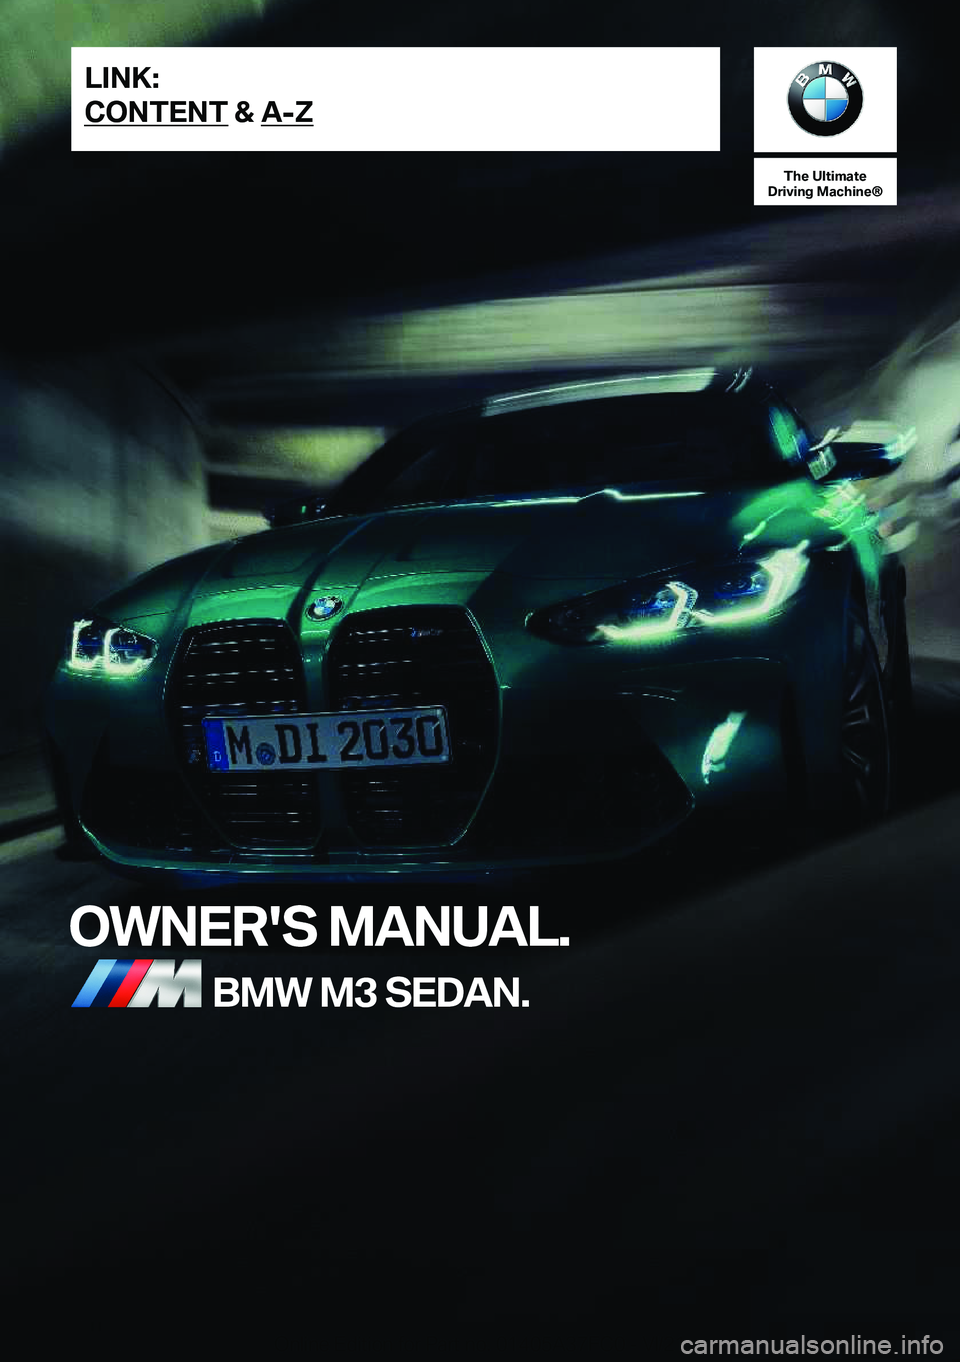 BMW M3 2022  Owners Manual �T�h�e��U�l�t�i�m�a�t�e
�D�r�i�v�i�n�g��M�a�c�h�i�n�e�n
�O�W�N�E�R�'�S��M�A�N�U�A�L�.�B�M�W��M�3��S�E�D�A�N�.�L�I�N�K�:
�C�O�N�T�E�N�T��&��A�-�Z�O�n�l�i�n�e��E�d�i�t�i�o�n��f�o�r��P�a�r�